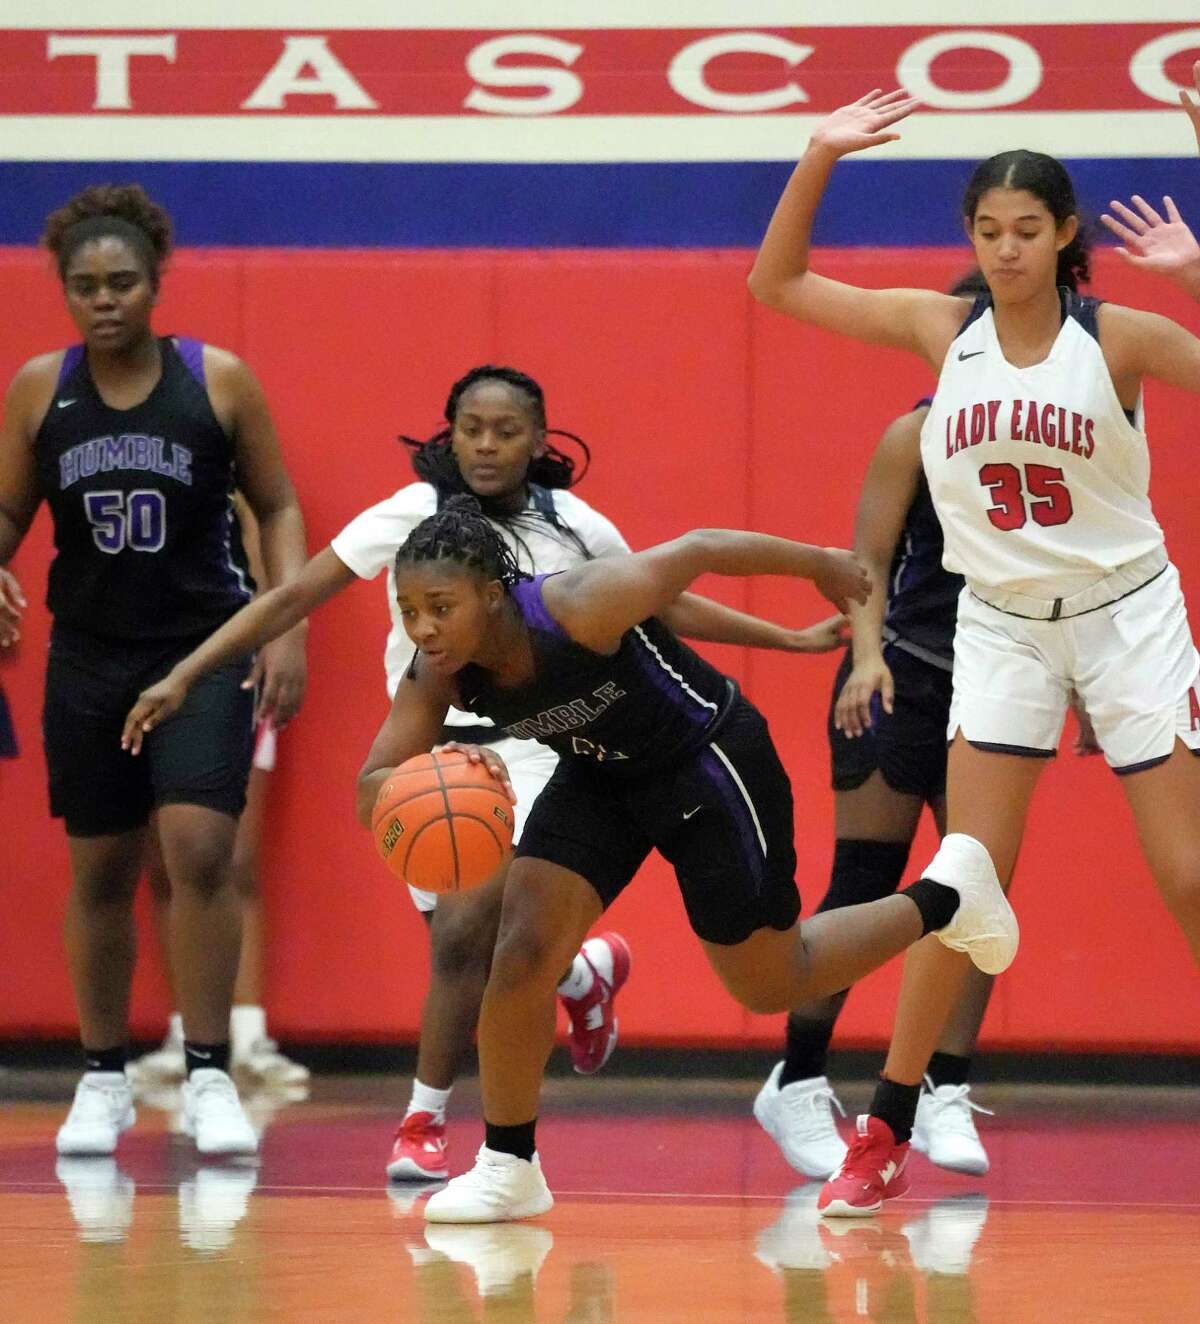 Humble High School's Dawn Roberson (1) grabs a rebound during the second half of a District 21-6A high school girls basketball game at Atascocita High School on Wednesday, Jan. 4, 2023 in Humble.